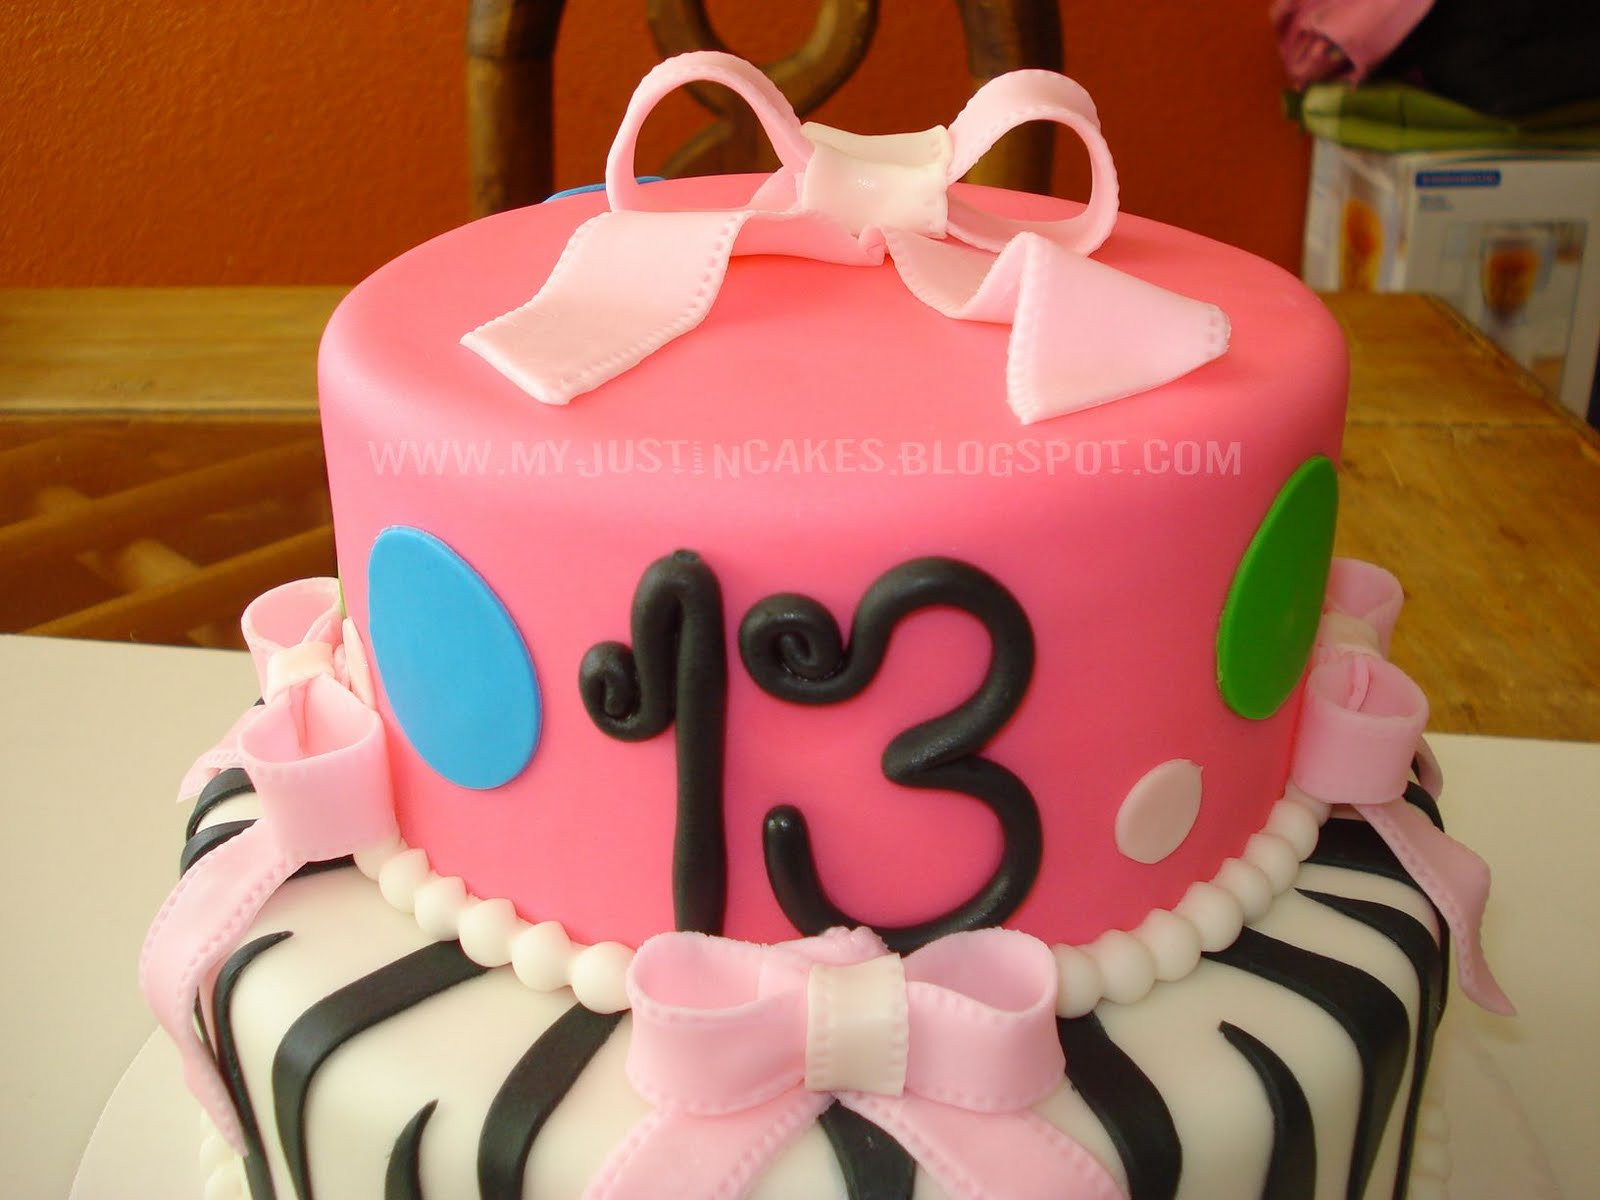 13 Yr Old Girl Birthday Party Ideas
 Just in Cakes 13 Year Old Girl Birthday Cake